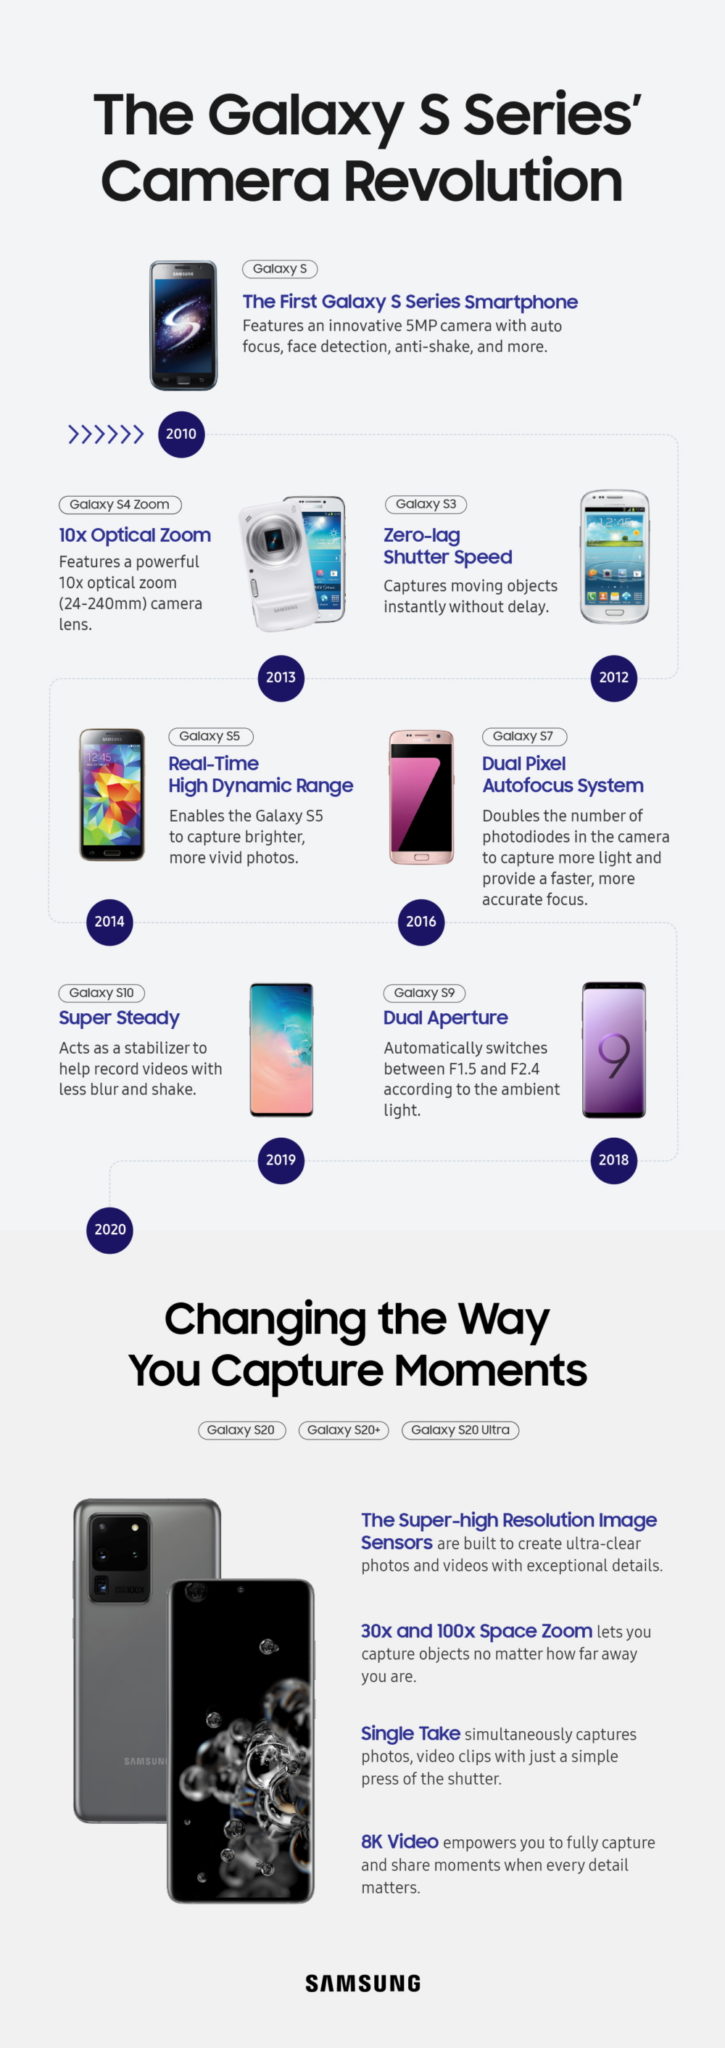 [Infographic] How Samsung’s Galaxy S Series Revolutionized the Camera